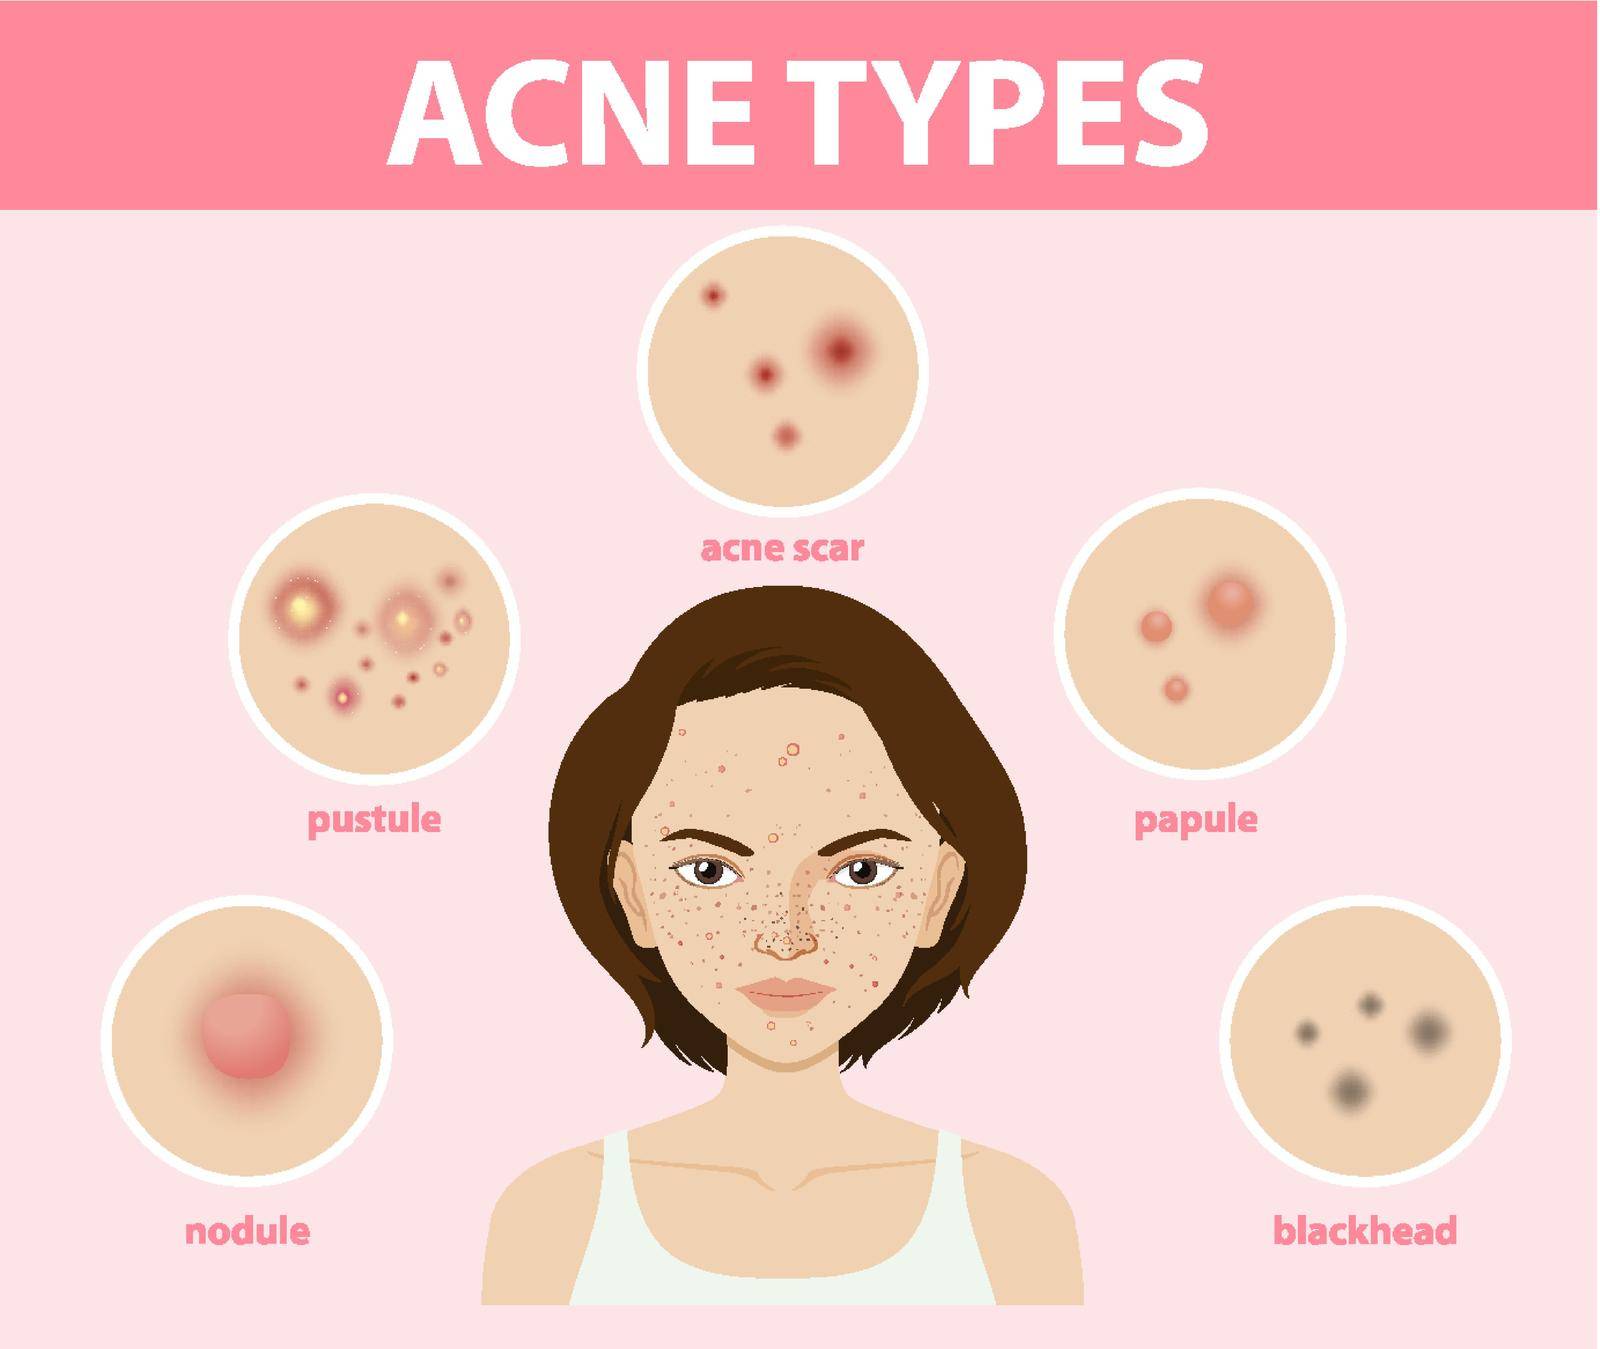 Types of acne on the skin or pimples by iimages